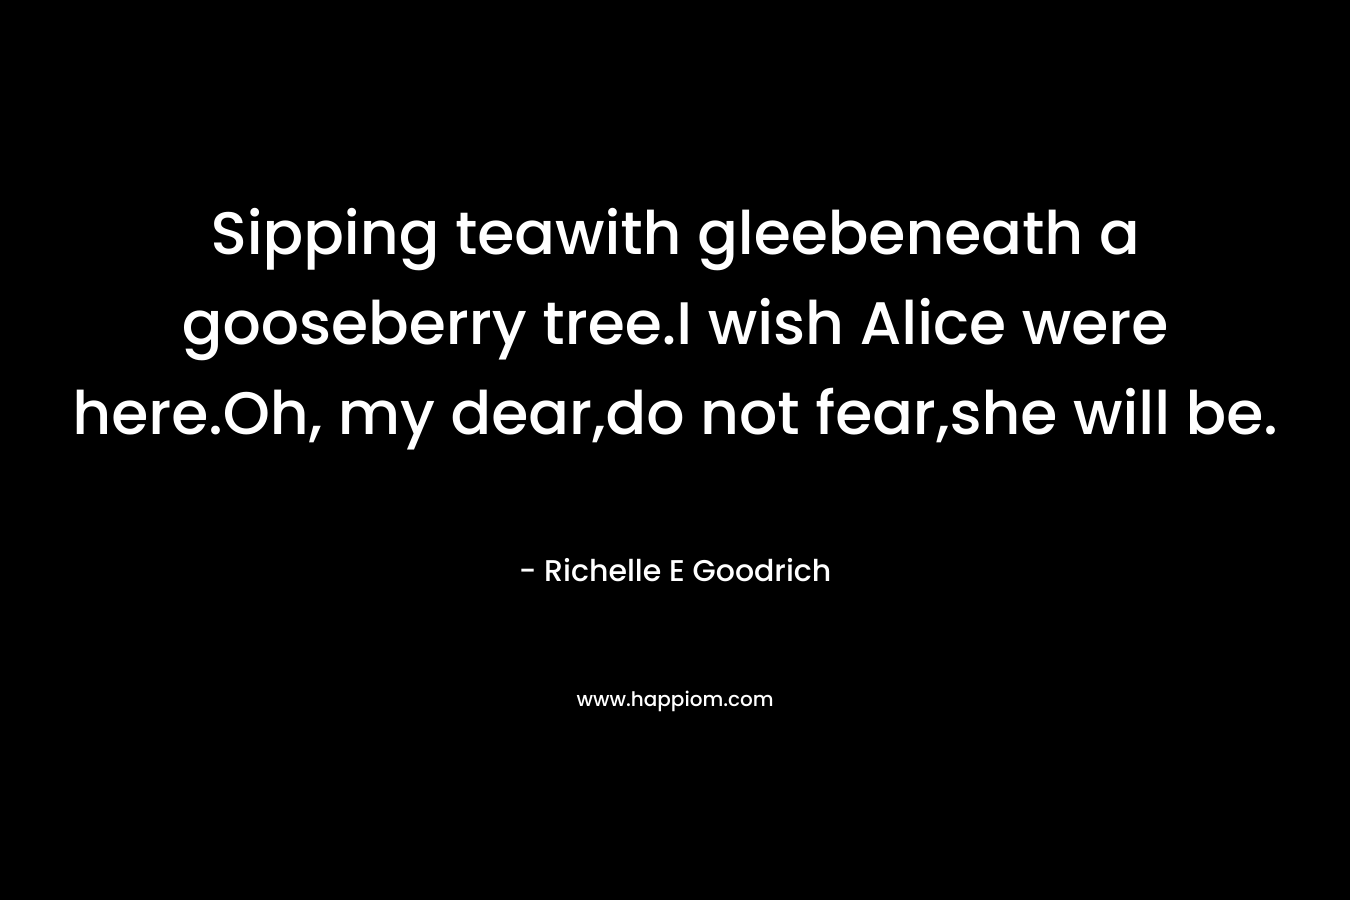 Sipping teawith gleebeneath a gooseberry tree.I wish Alice were here.Oh, my dear,do not fear,she will be.